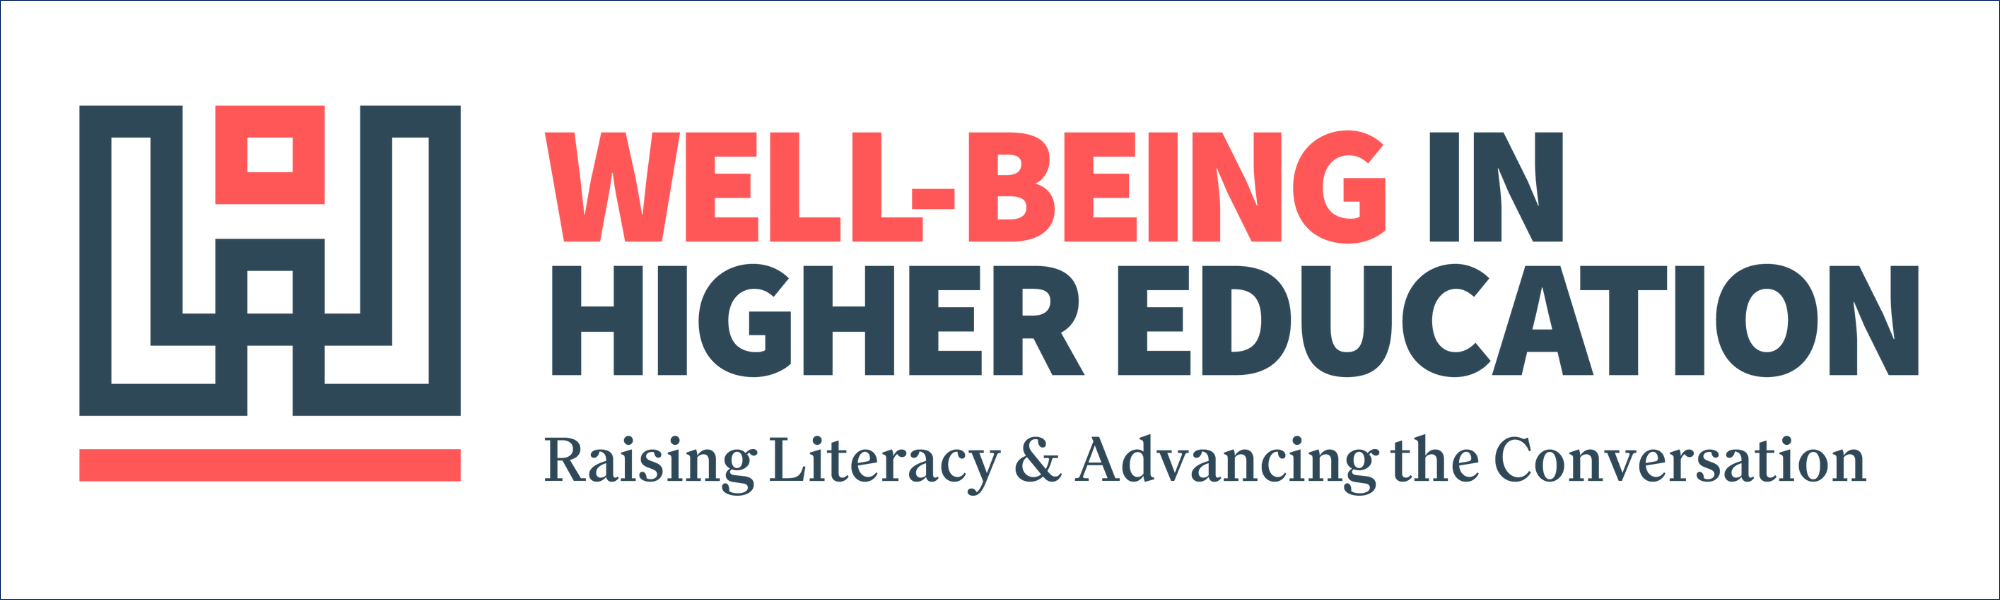 Well-being in Higher Education banner